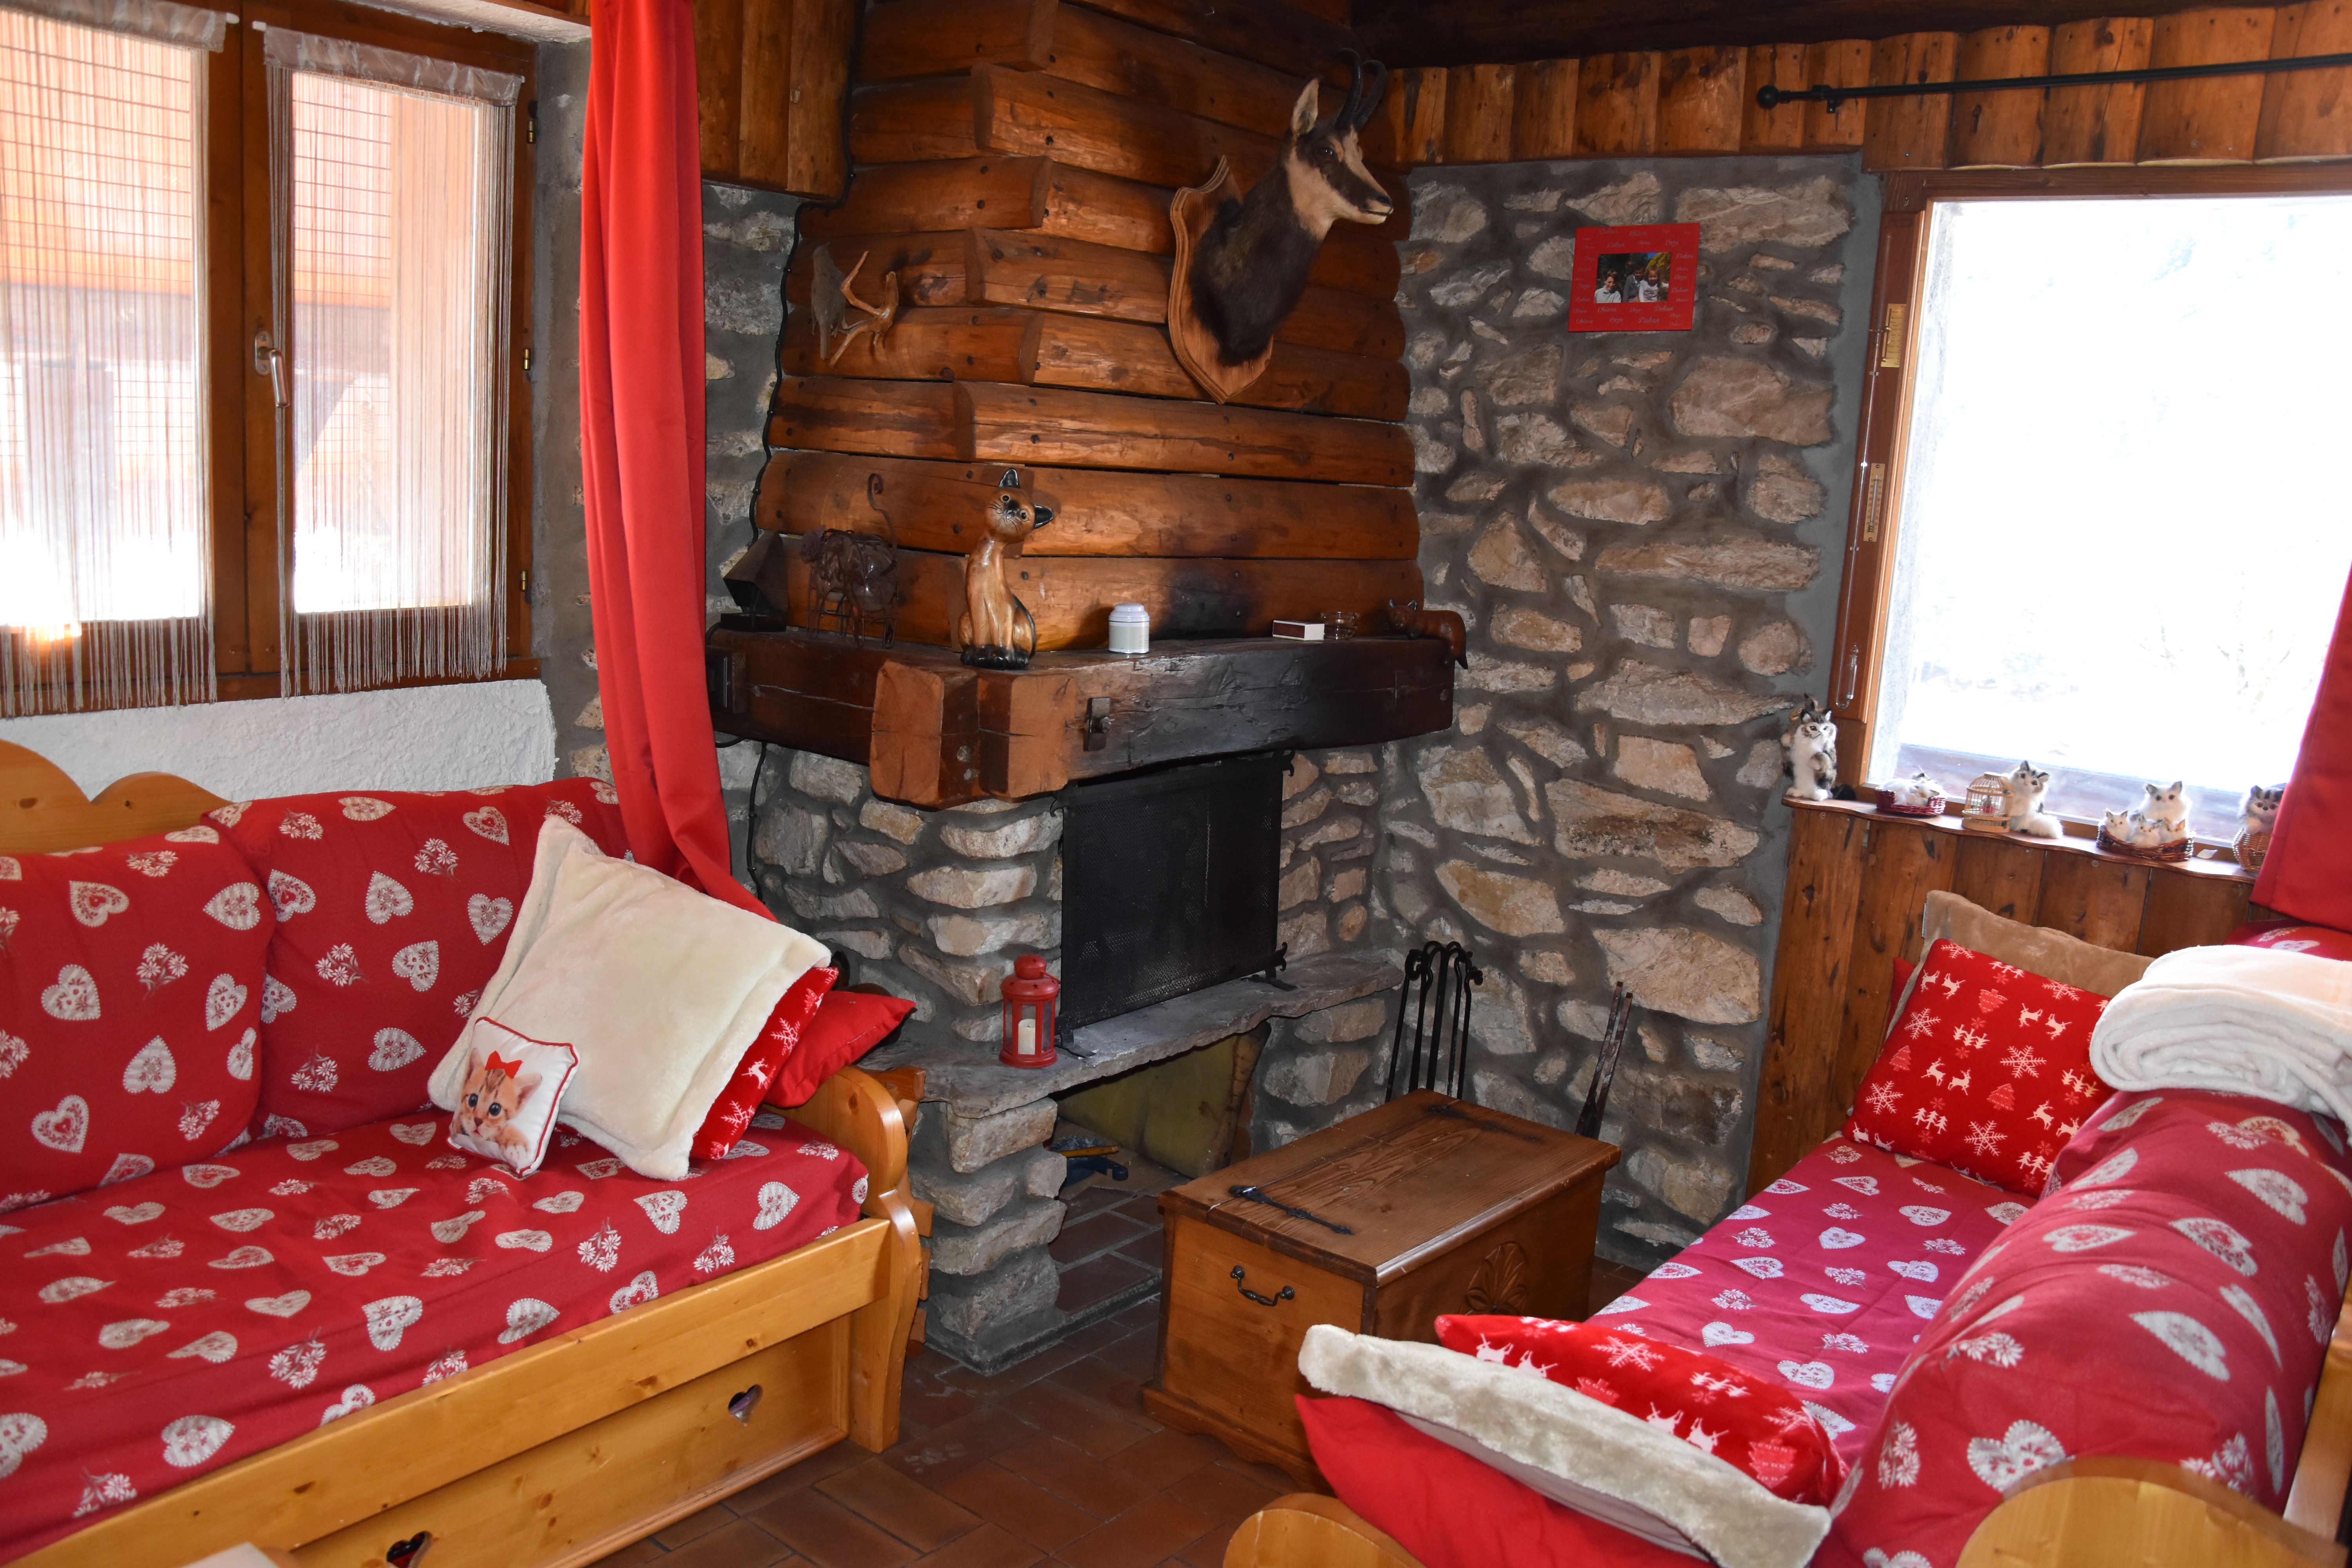 Sale : Great opportunity for this chalet